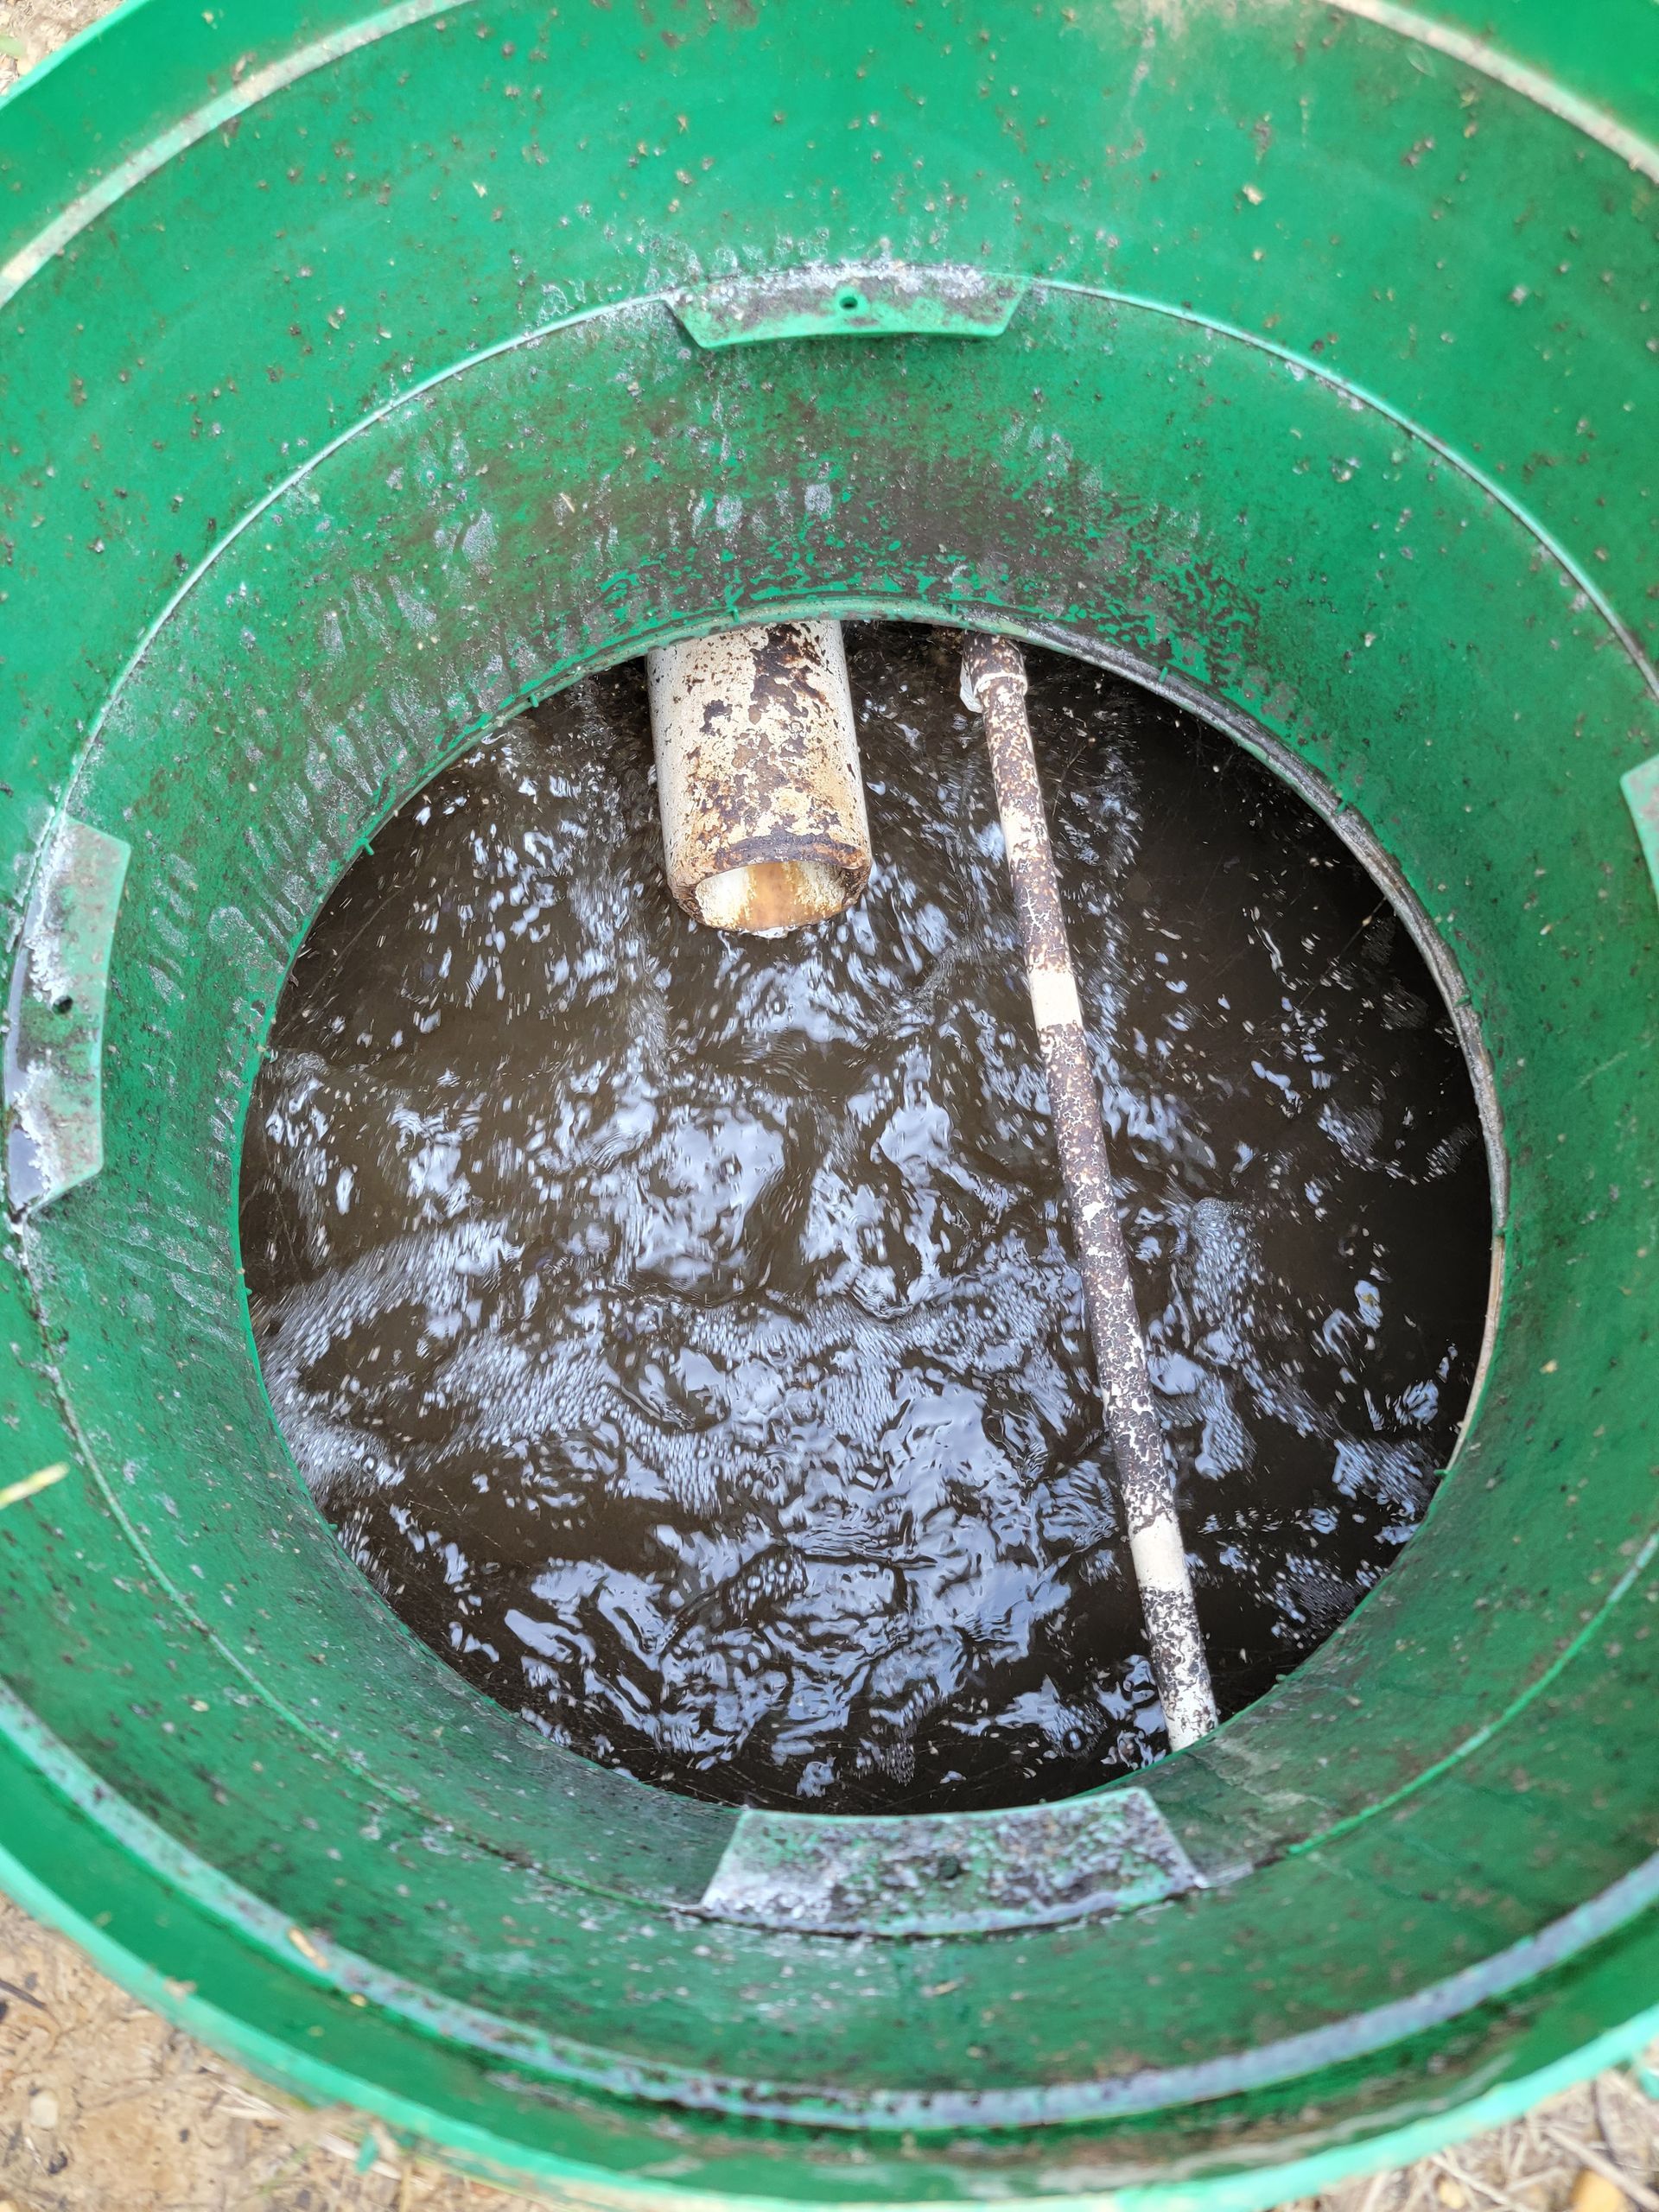 Septic System Service and Septic Pumping in Oxford, MS & Water Valley, MS